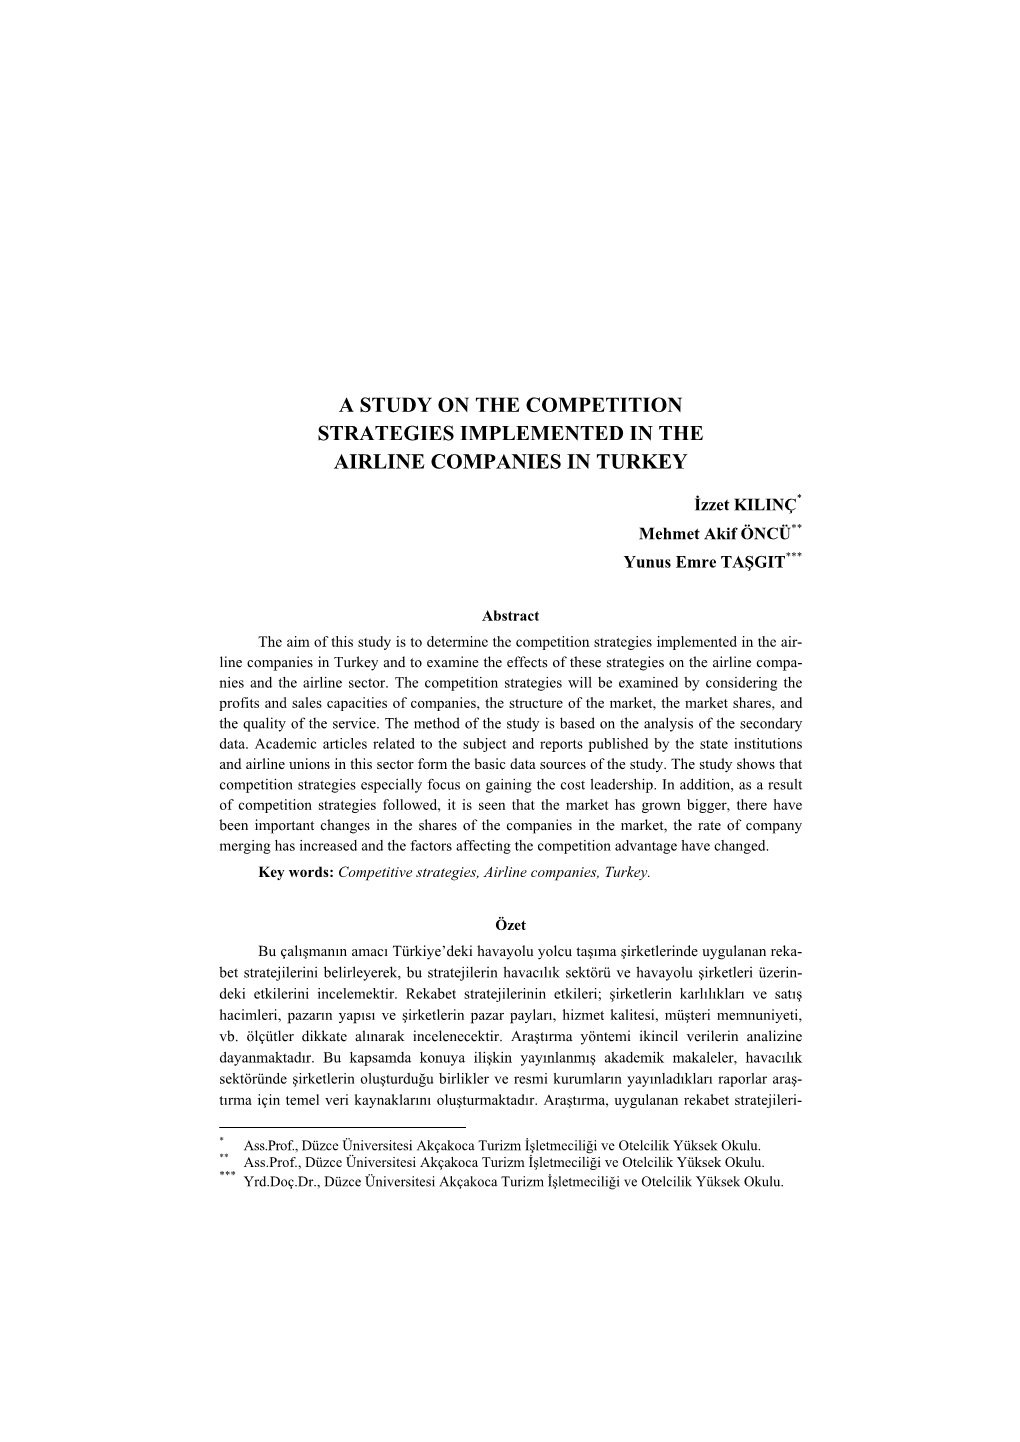 A Study on the Competition Strategies Implemented in the Airline Companies in Turkey